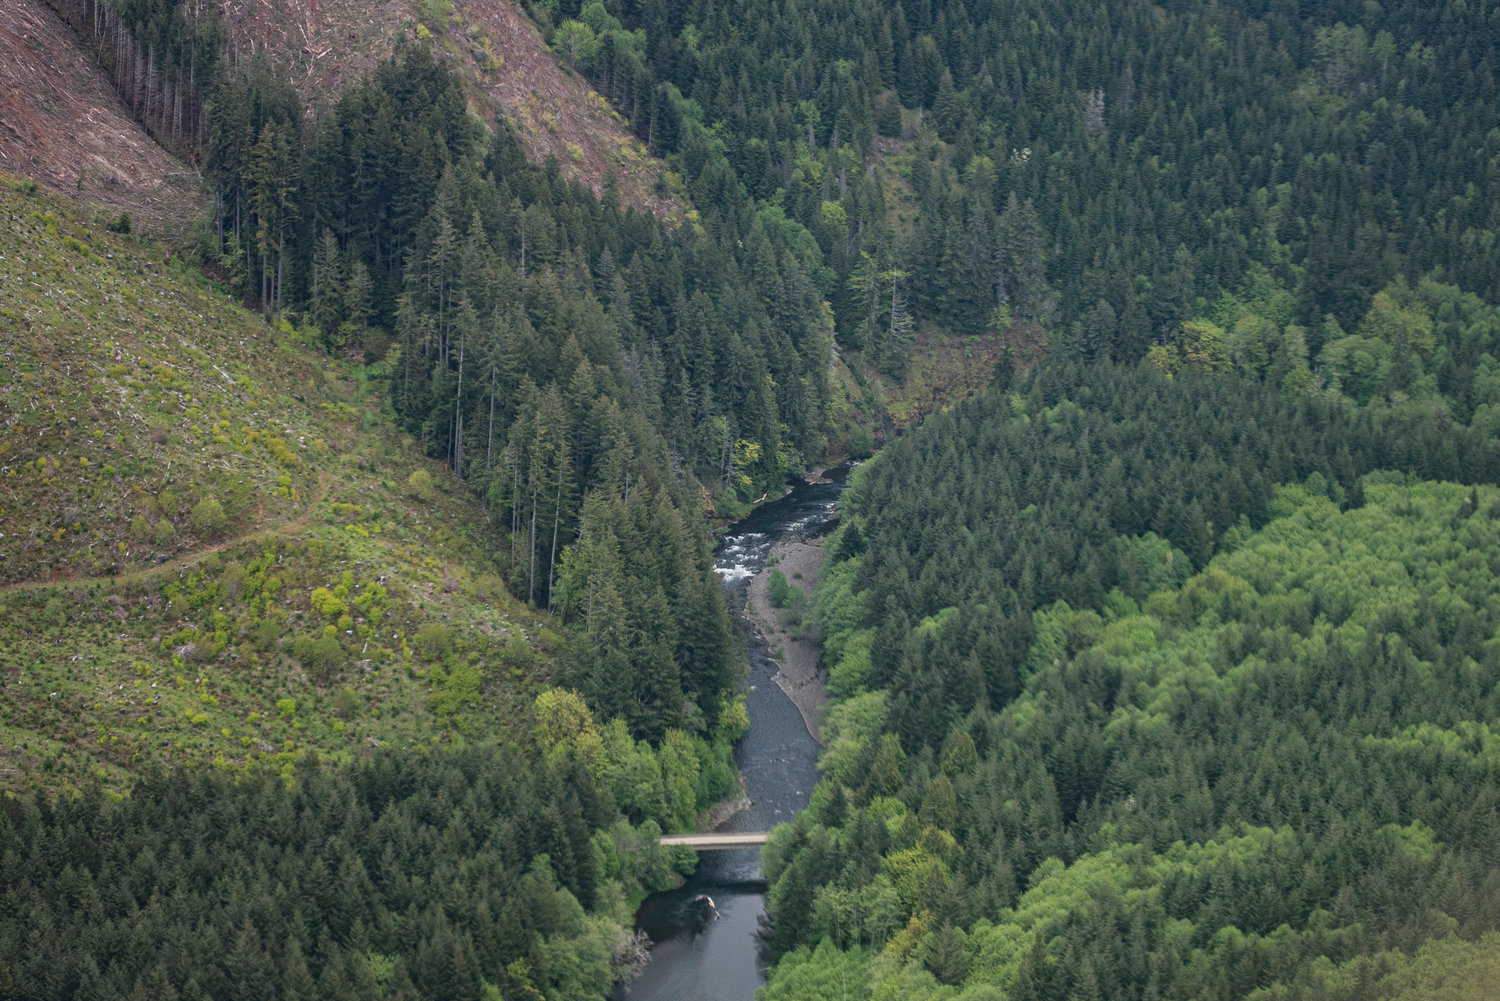 The Chehalis River runs through Weyerhaeuser property upstream of Pe Ell as it comes out of the Willapa Hills.